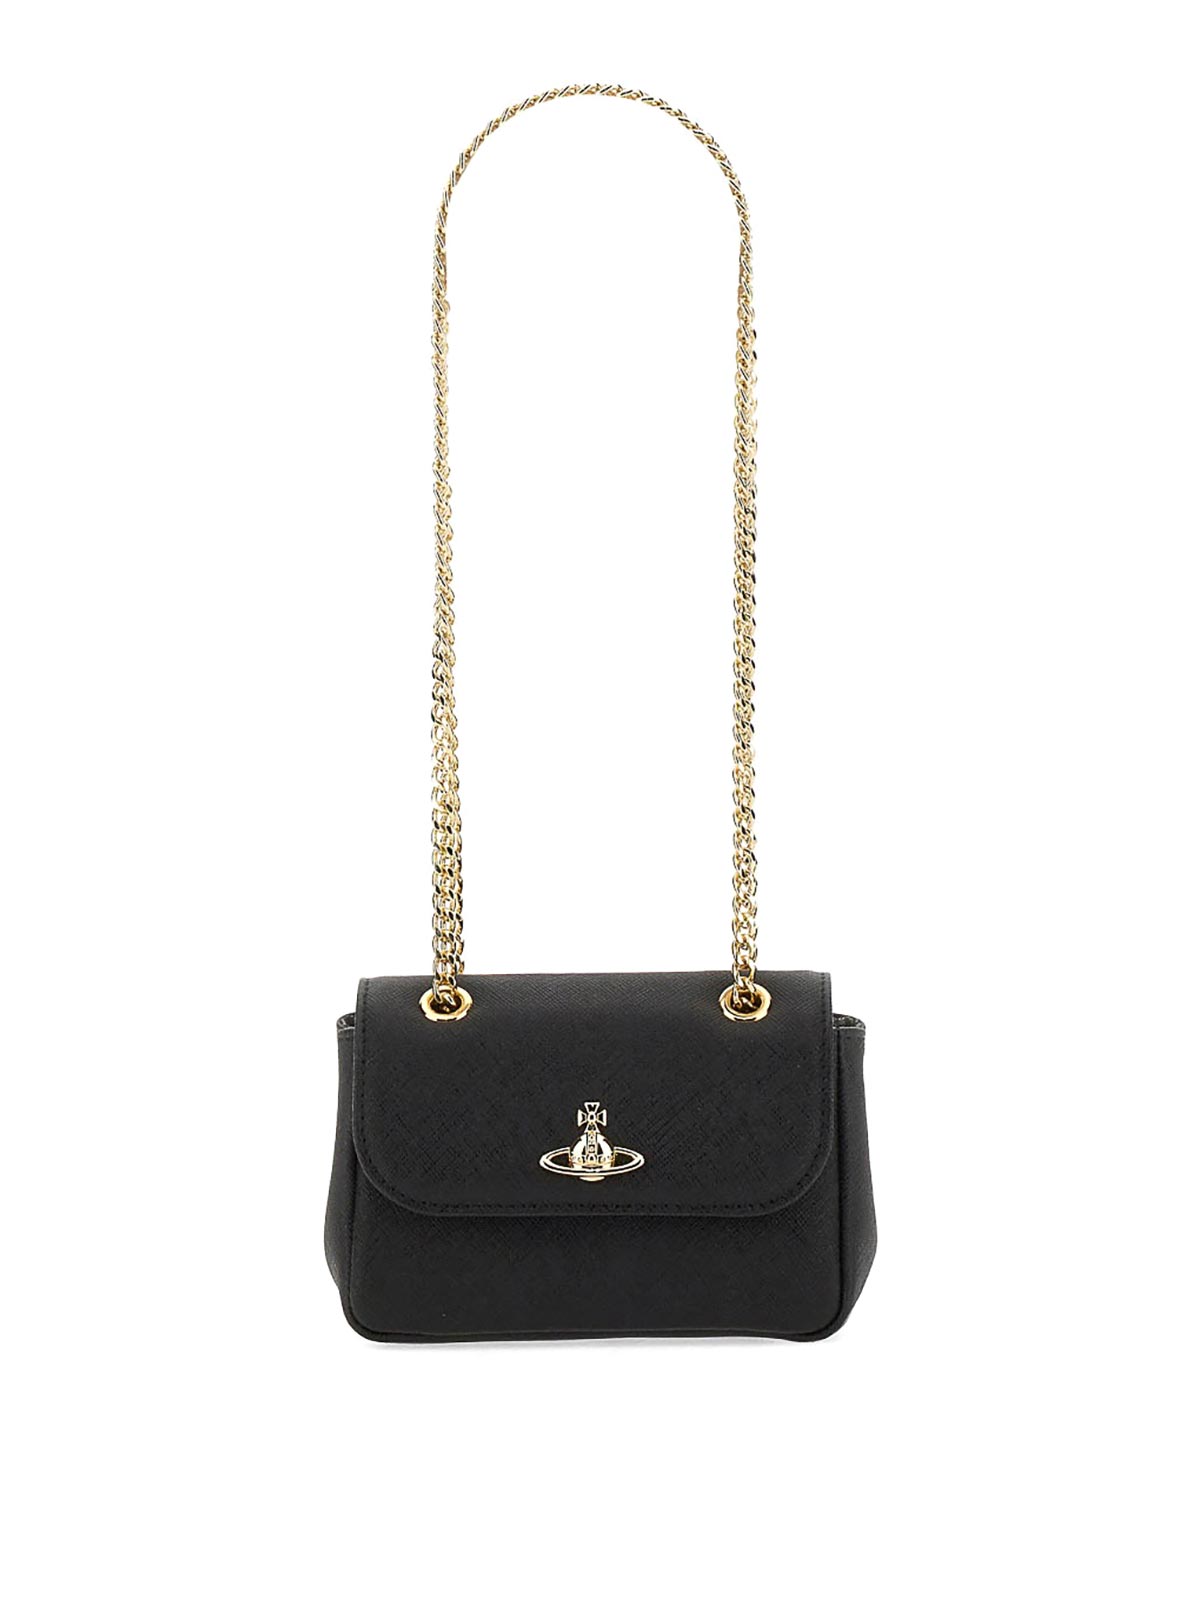 Vivienne Westwood Victoria Small Bag With Chain In Black